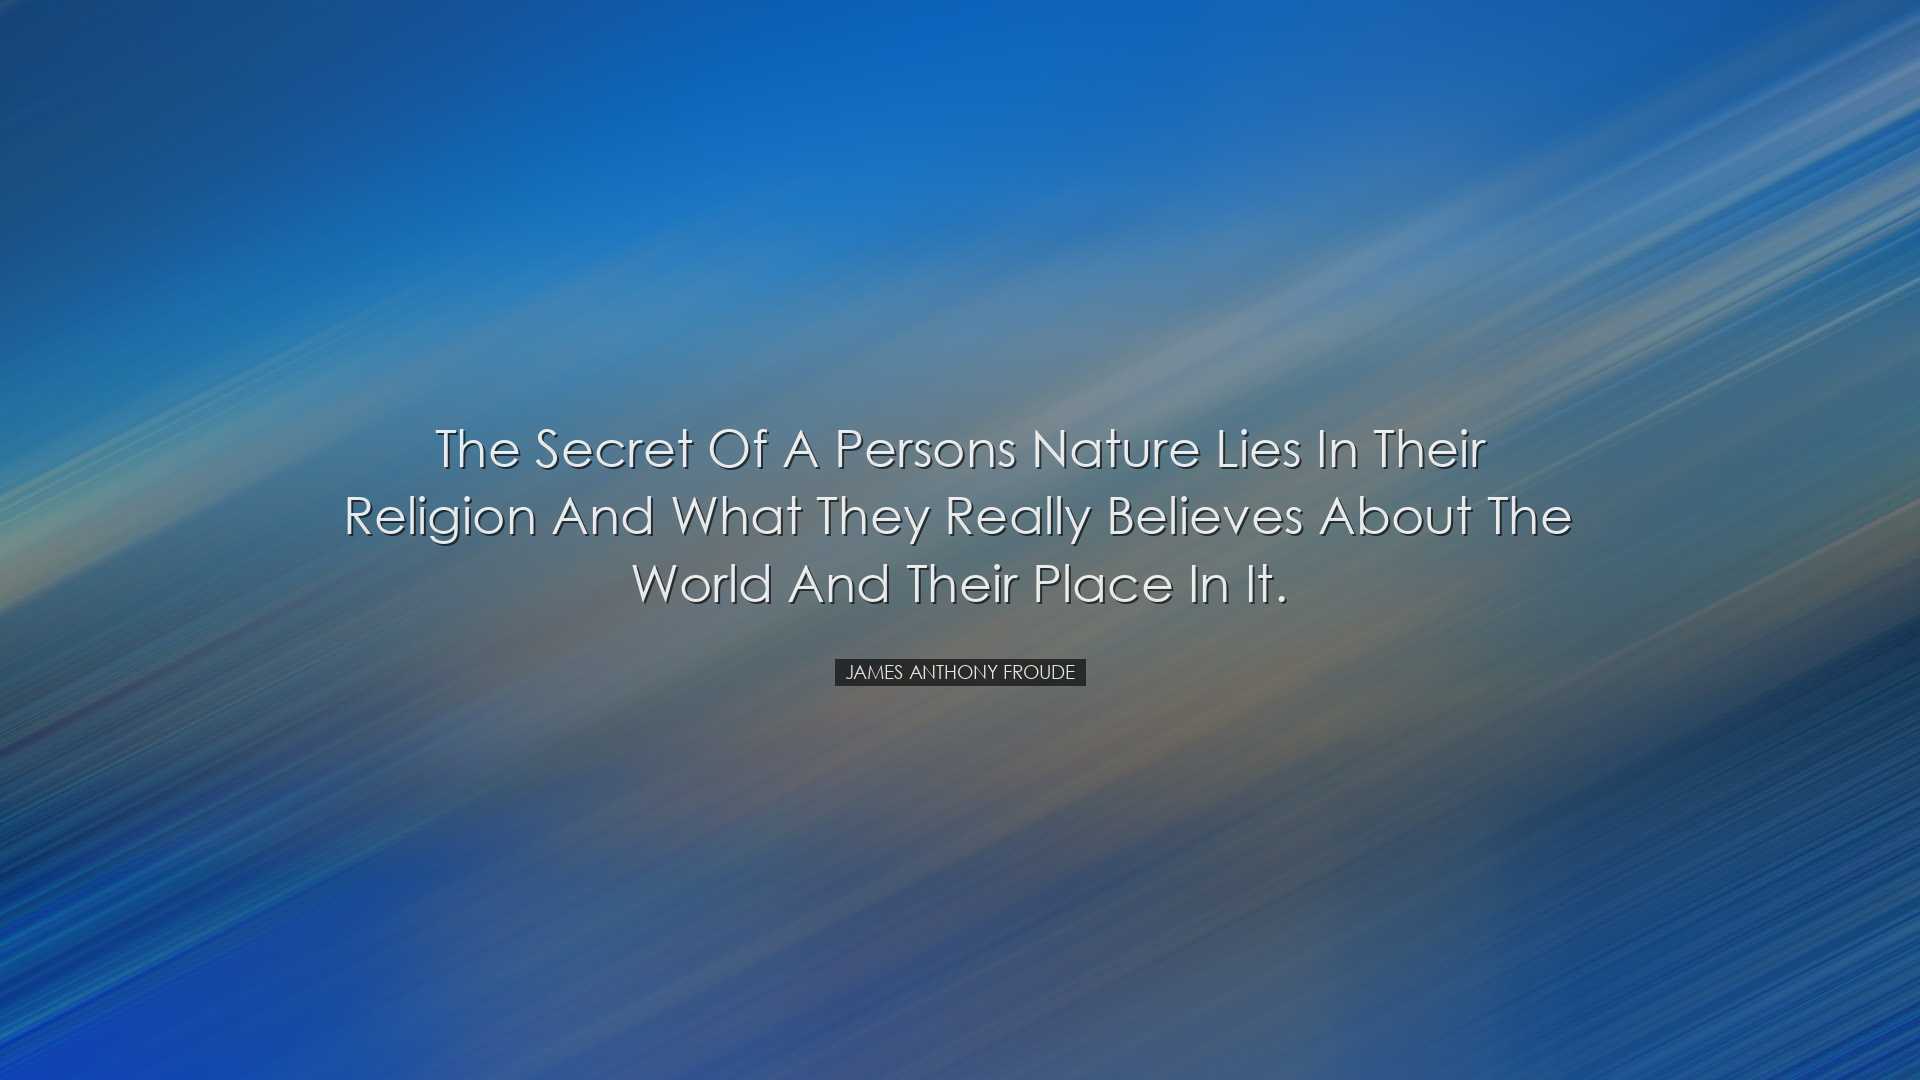 The secret of a persons nature lies in their religion and what the